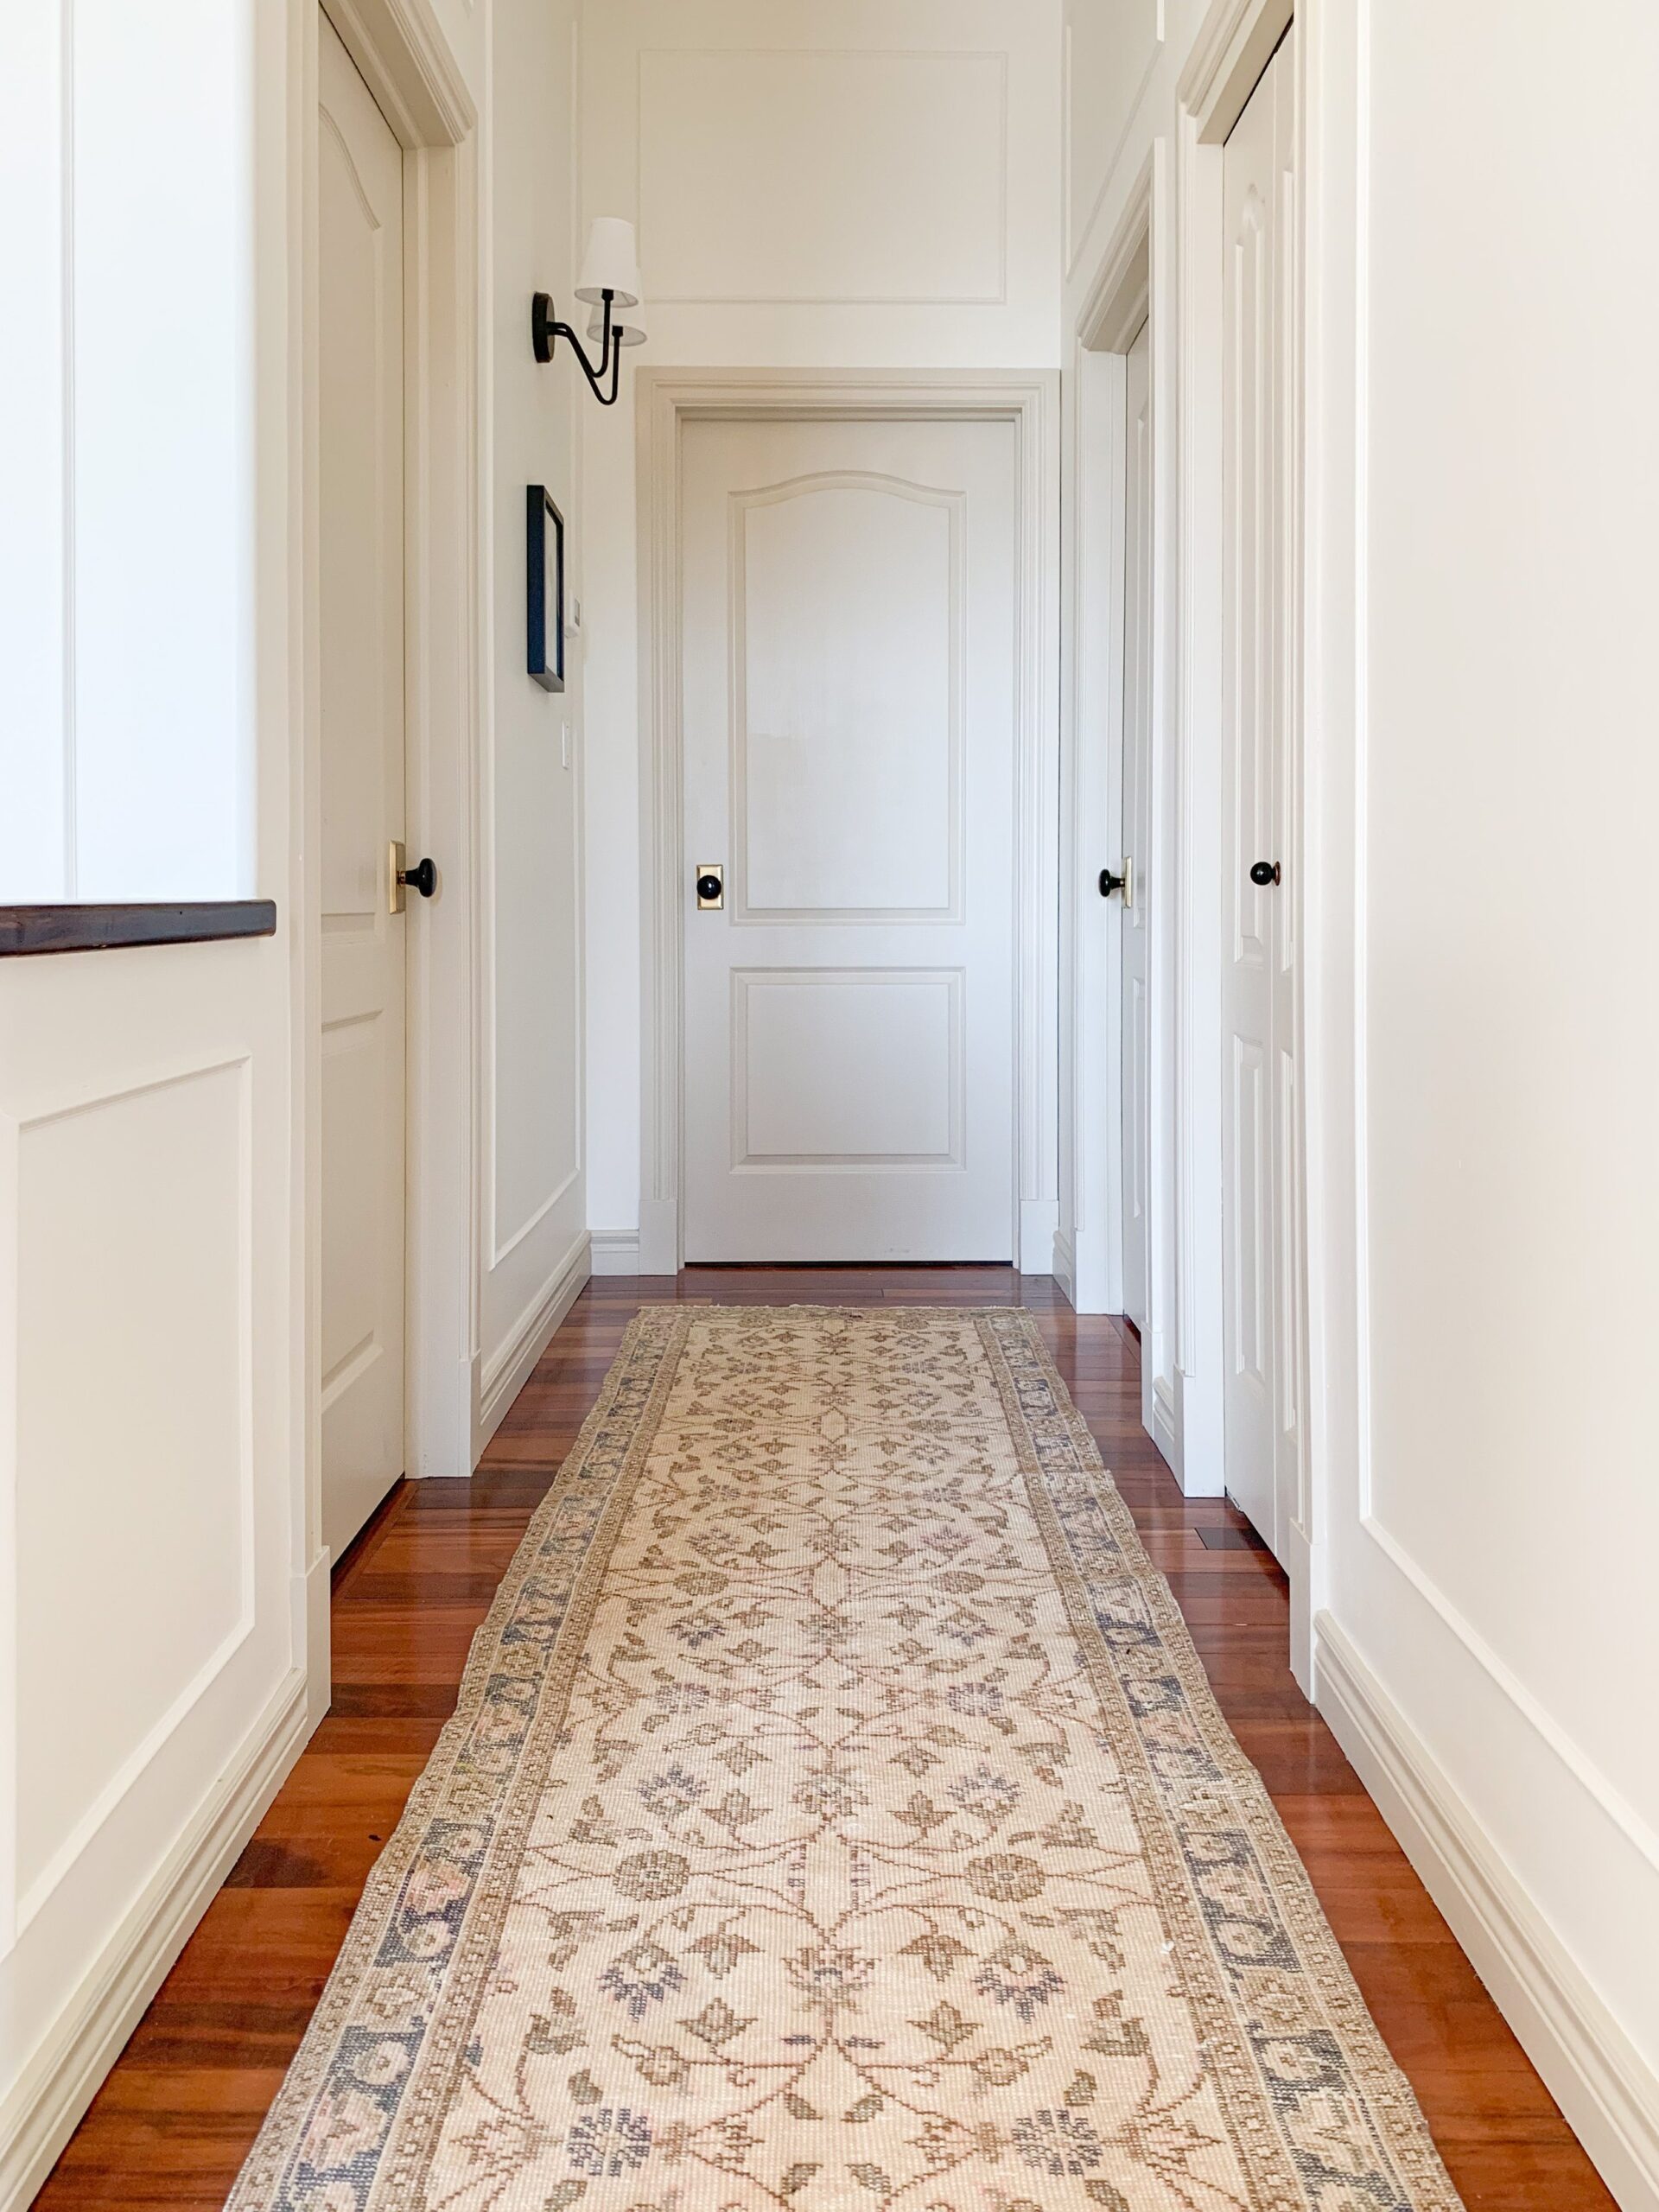 Beige vintage runner in a hallway with lots of doors painted edgecomb grey and walls white, with brass and black doorknobs